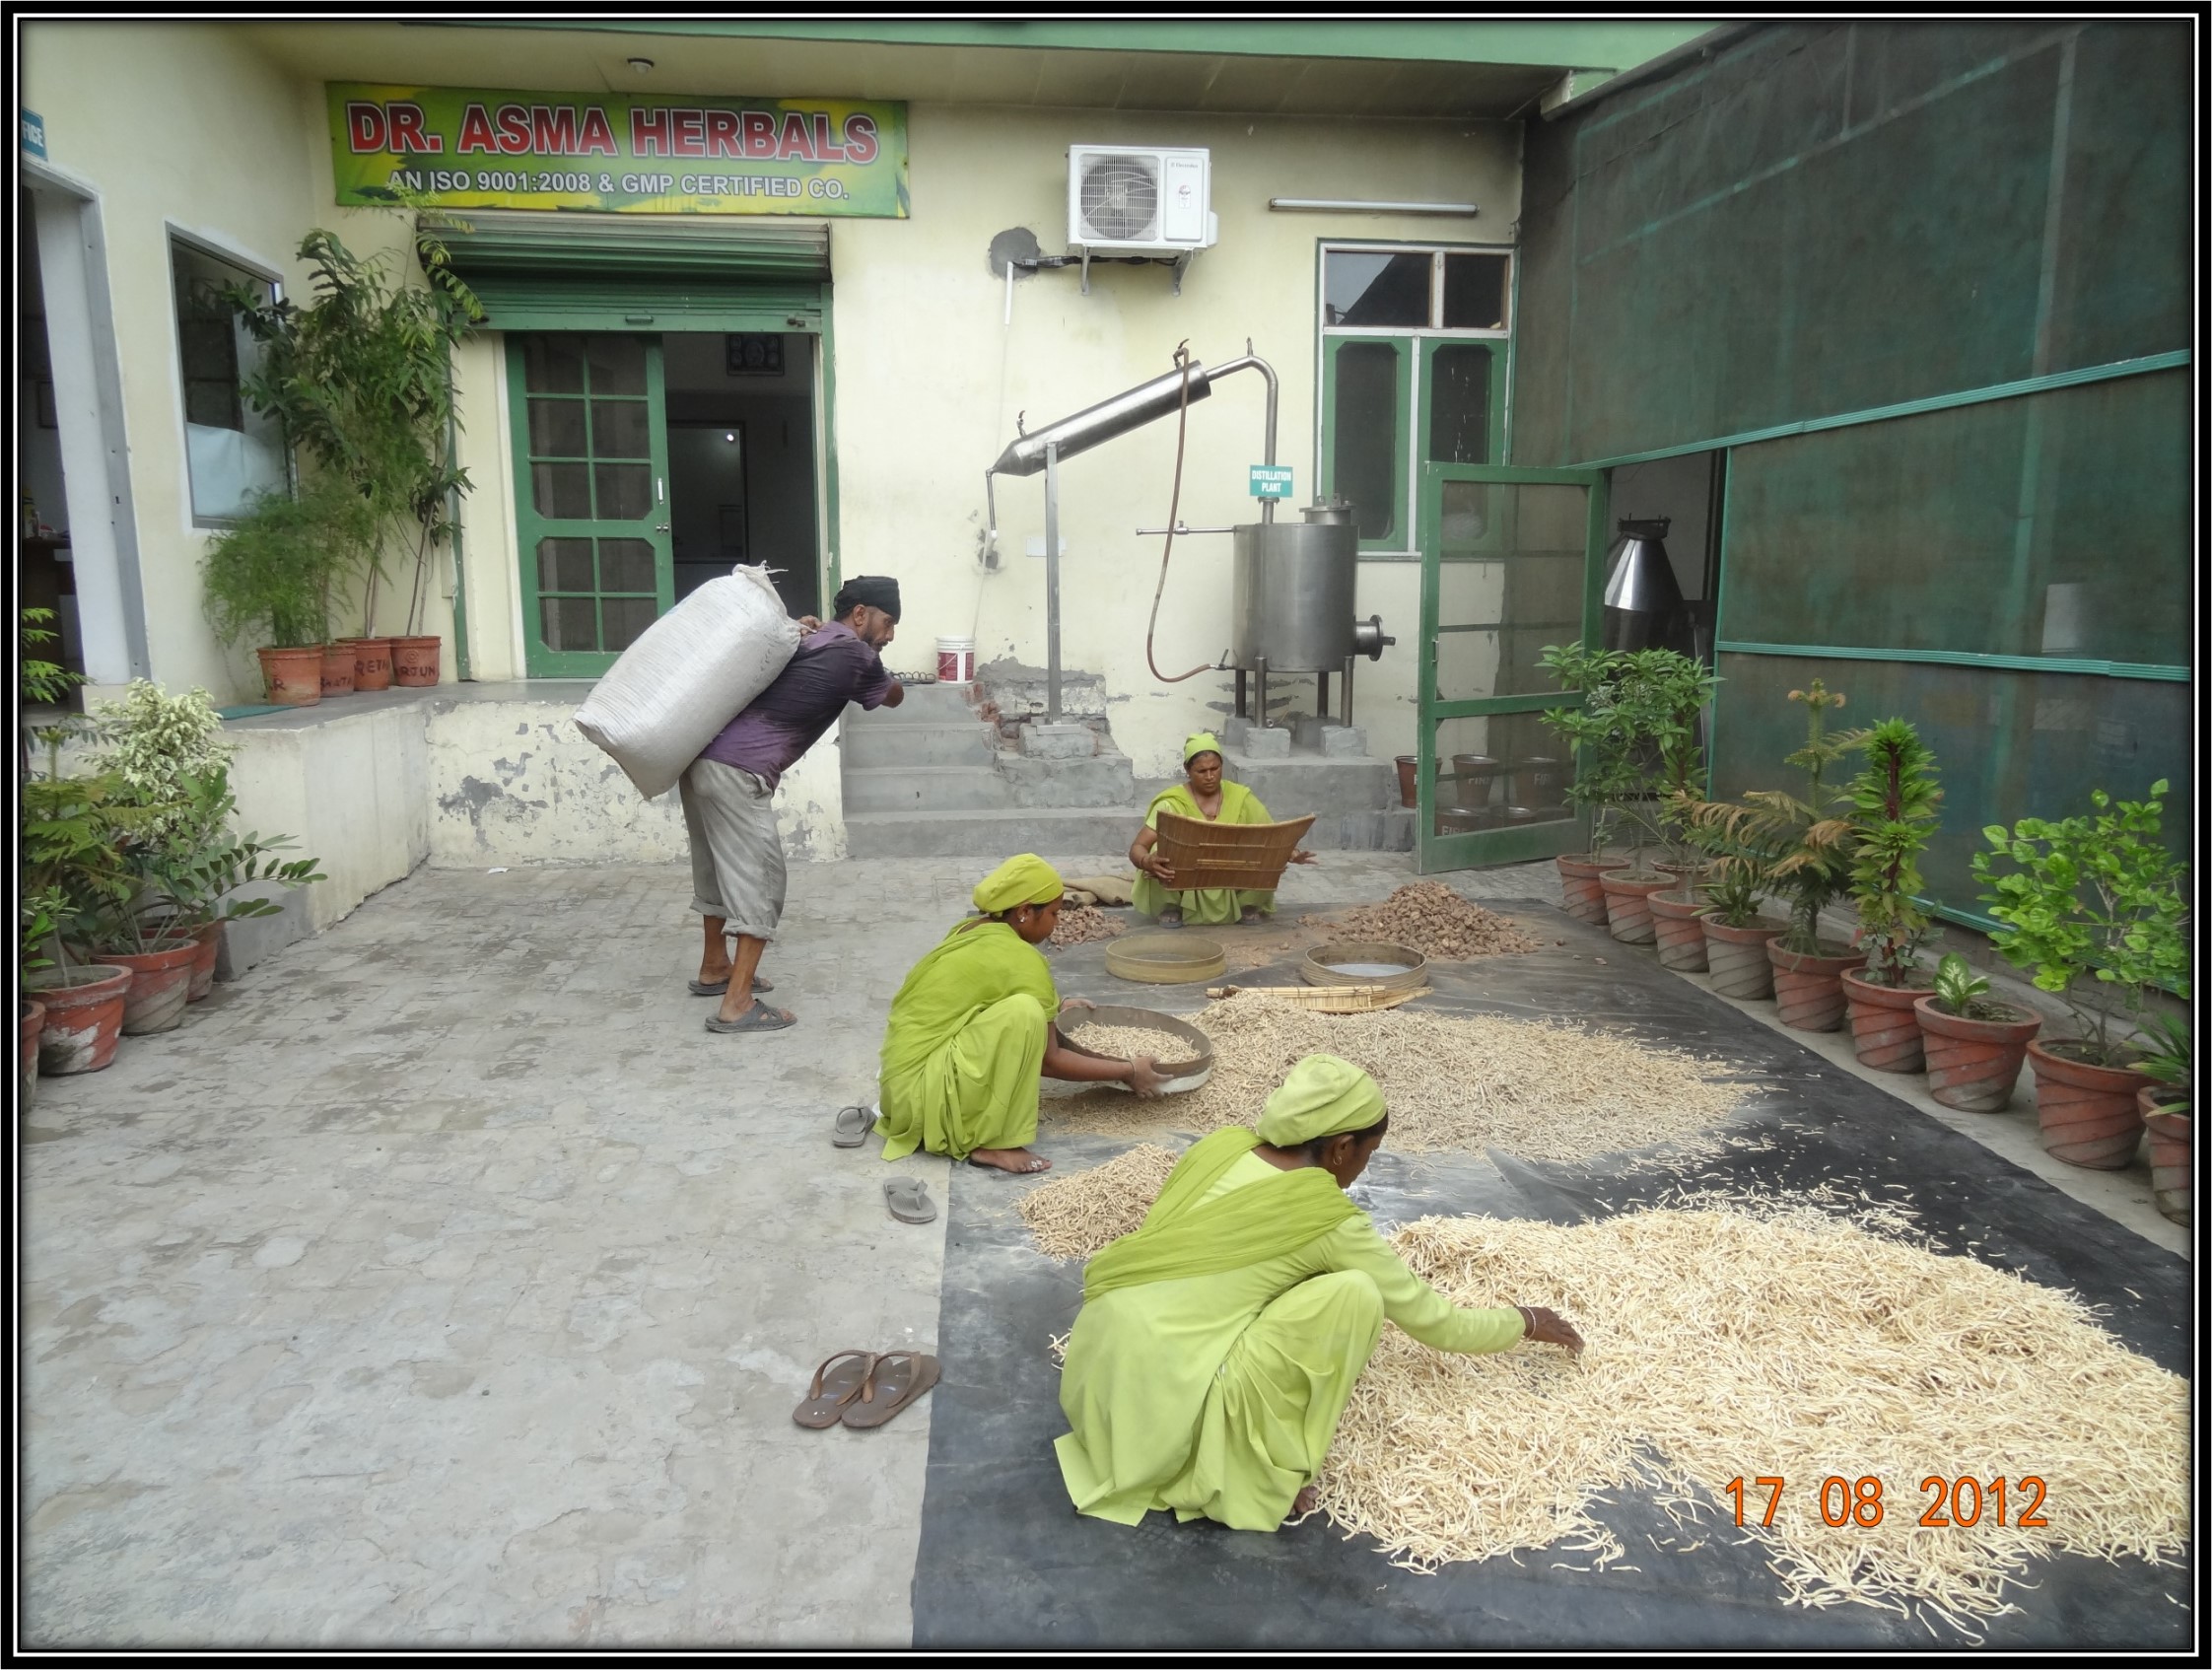 Herbs being sorted at Dr. Asma Herbals Factory